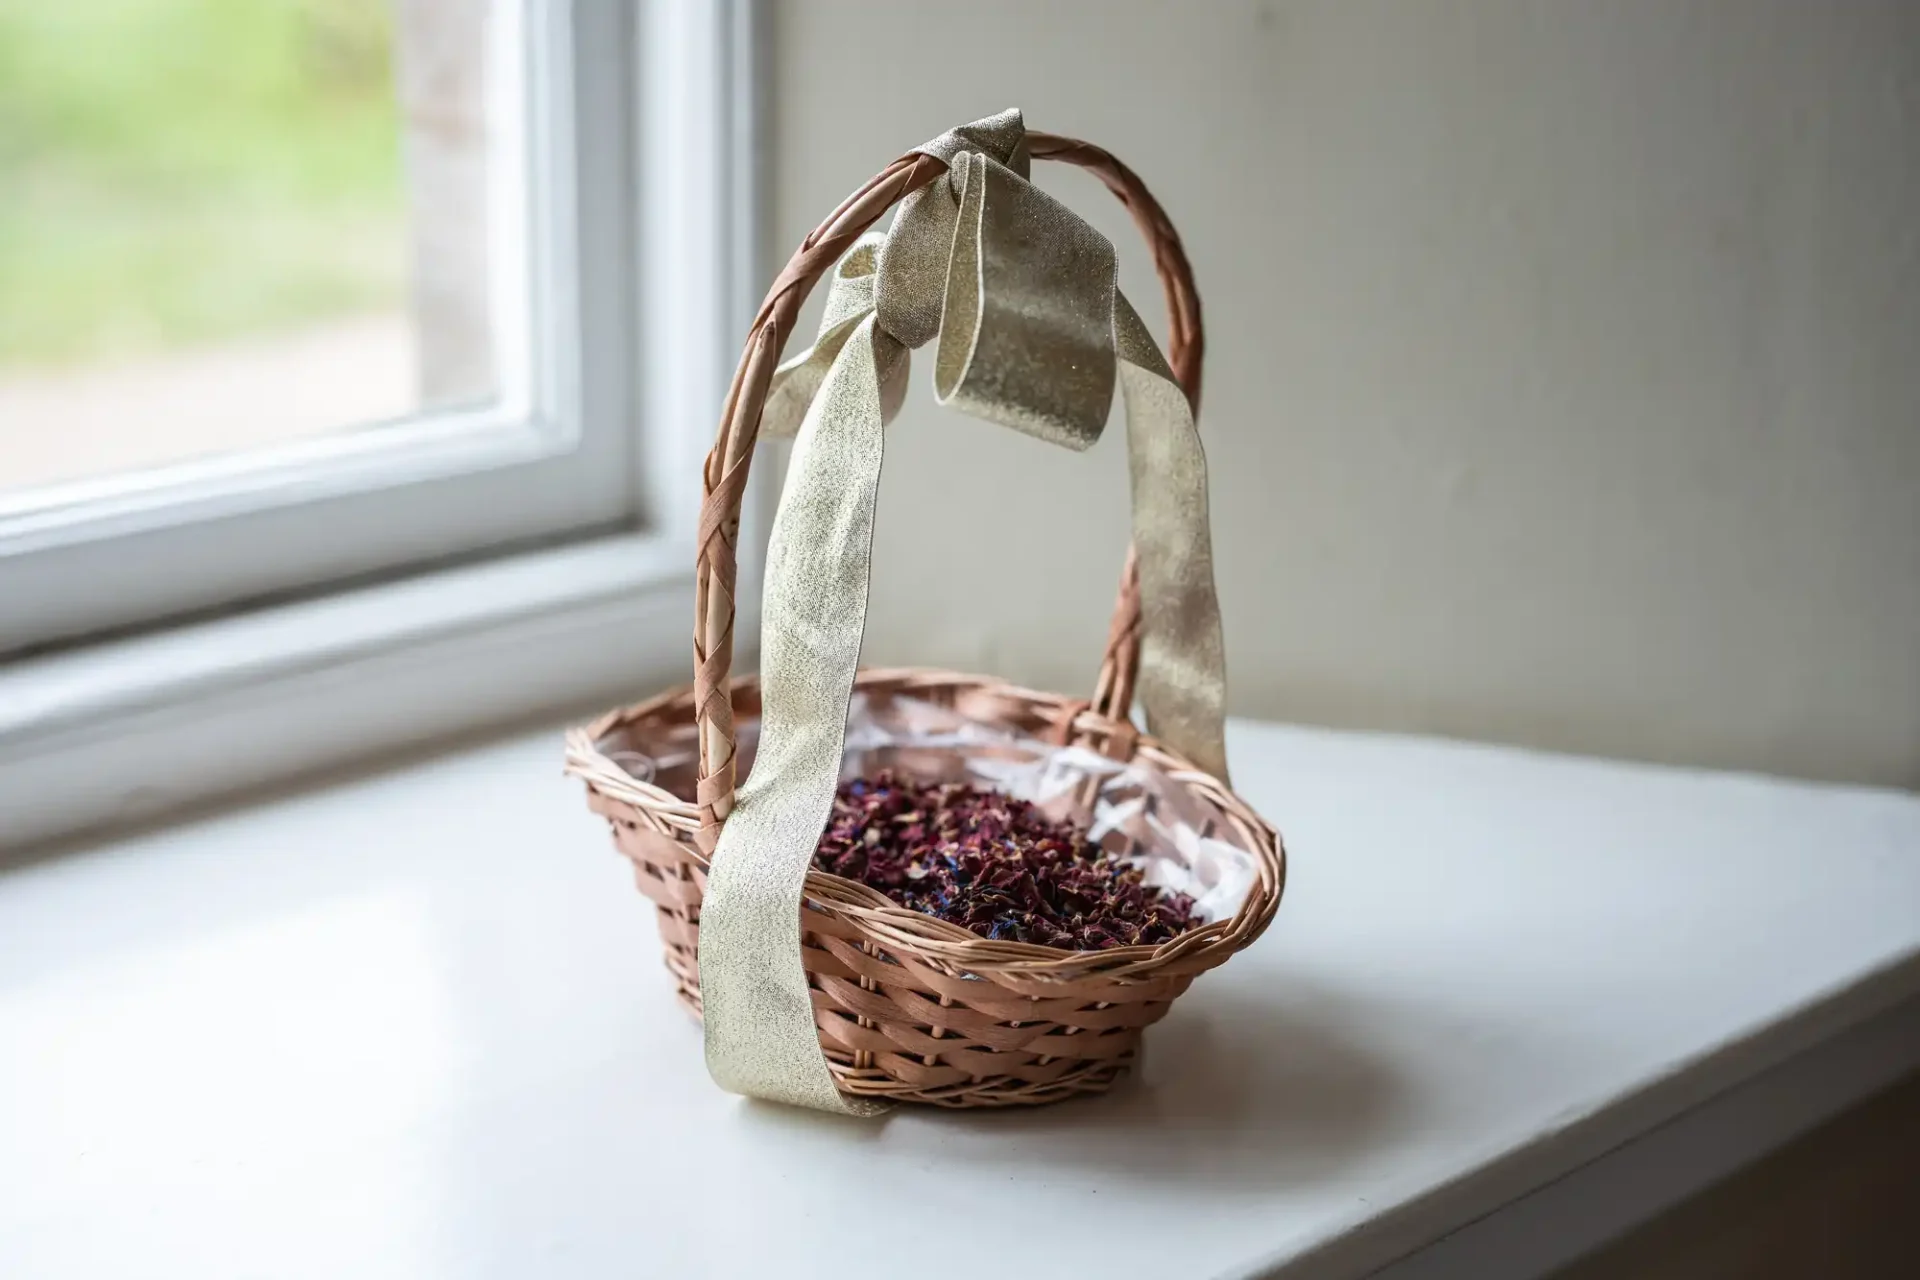 A wicker basket with a gold ribbon handle contains dried flower petals and sits on a white windowsill.